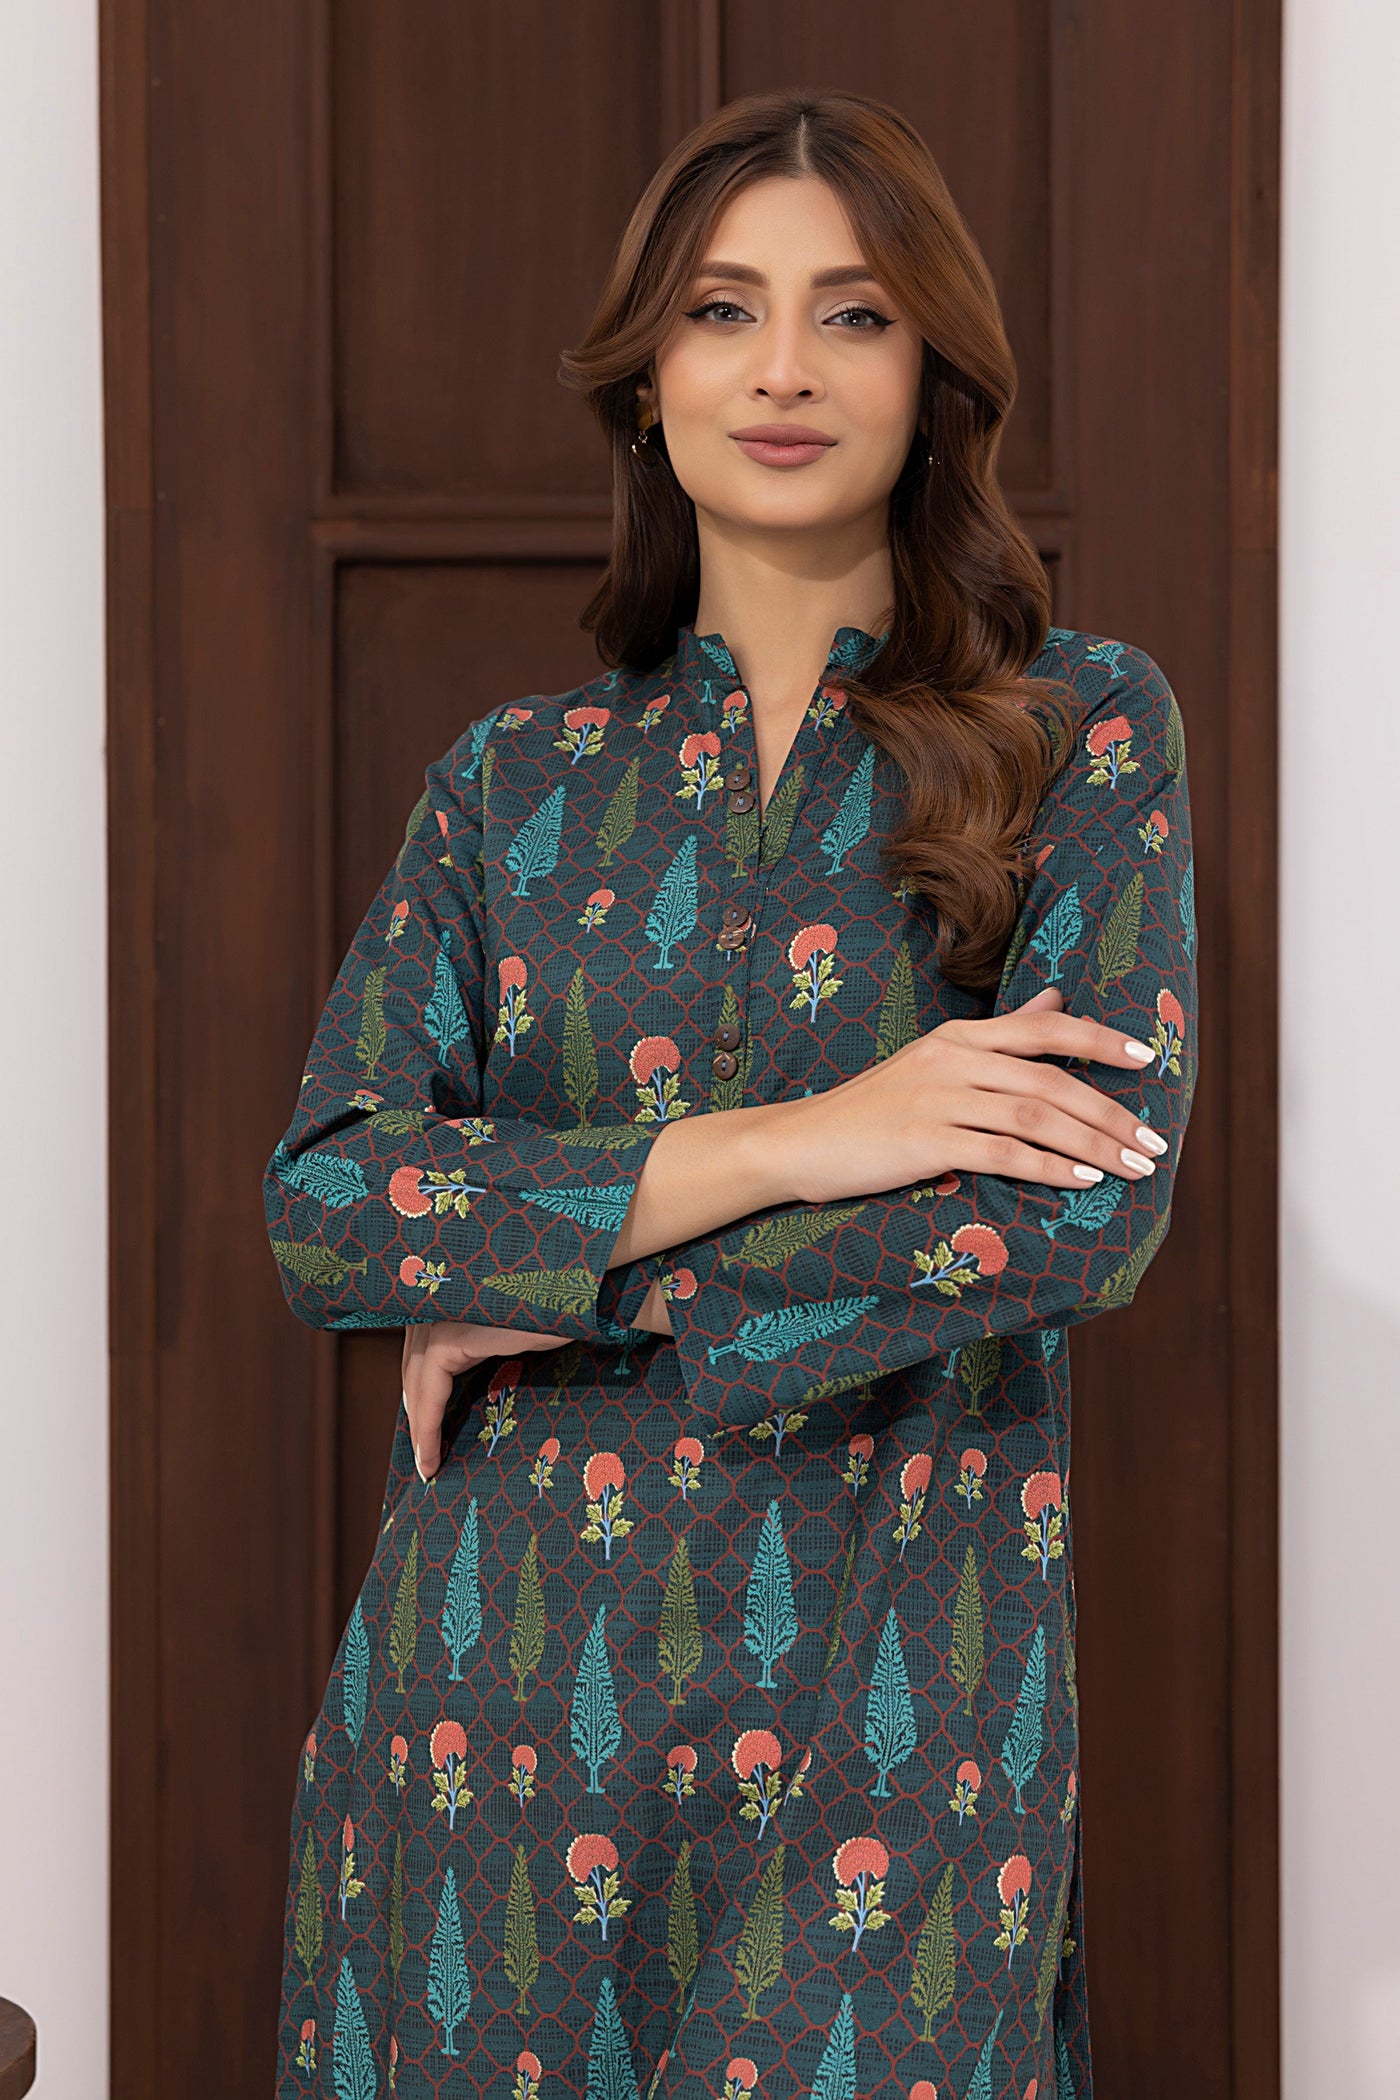 Lakhany 01 Piece Ready to Wear Printed Cambric Shirt - LG-RM-0041